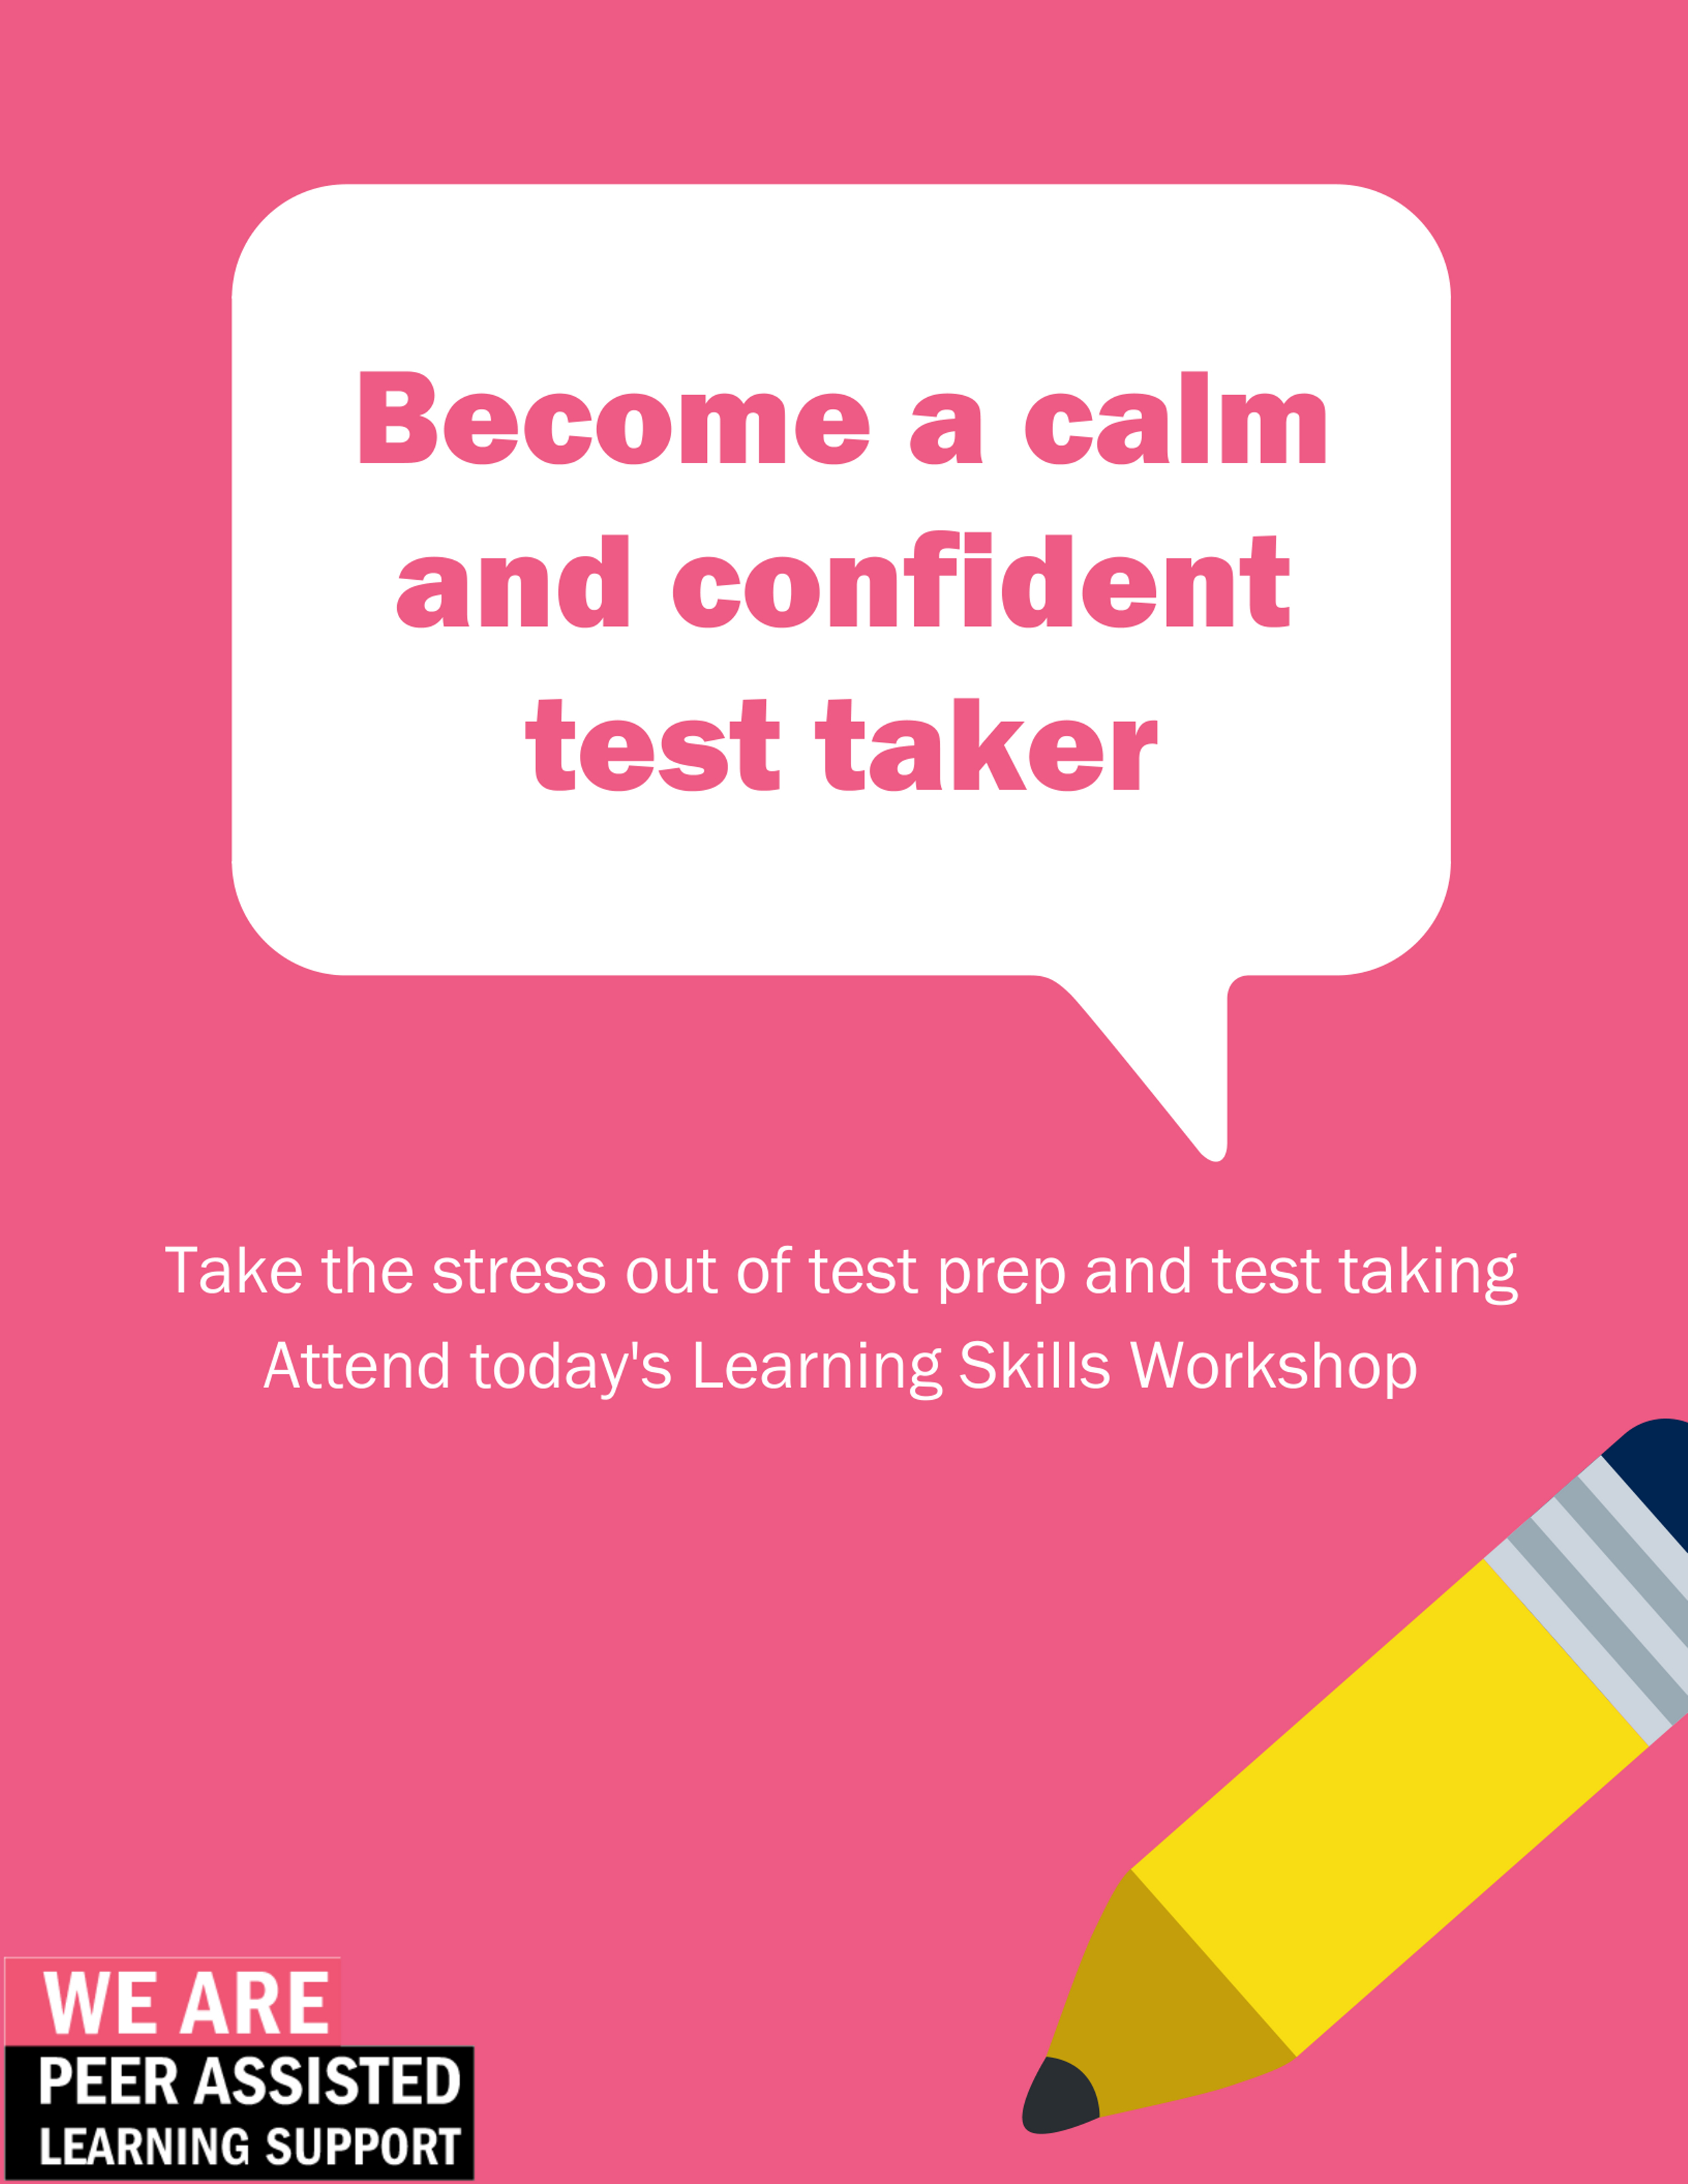 Attend this workshop and learn ways to become a calm and confident test taker. 